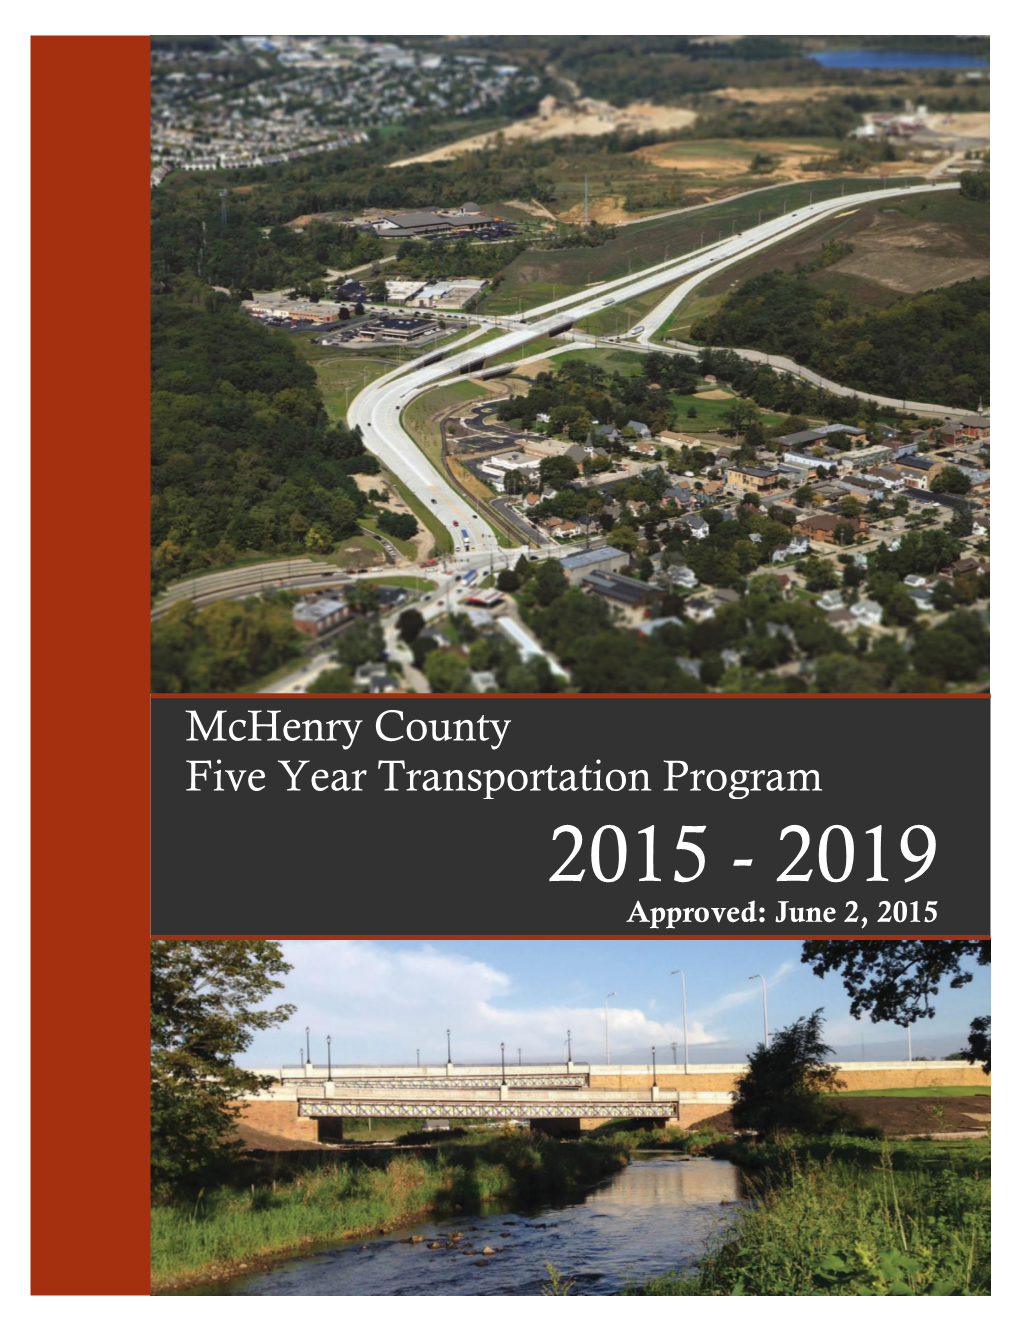 Mchenry County Five Year Transportation Program 2015 - 2019 Approved: June 2, 2015